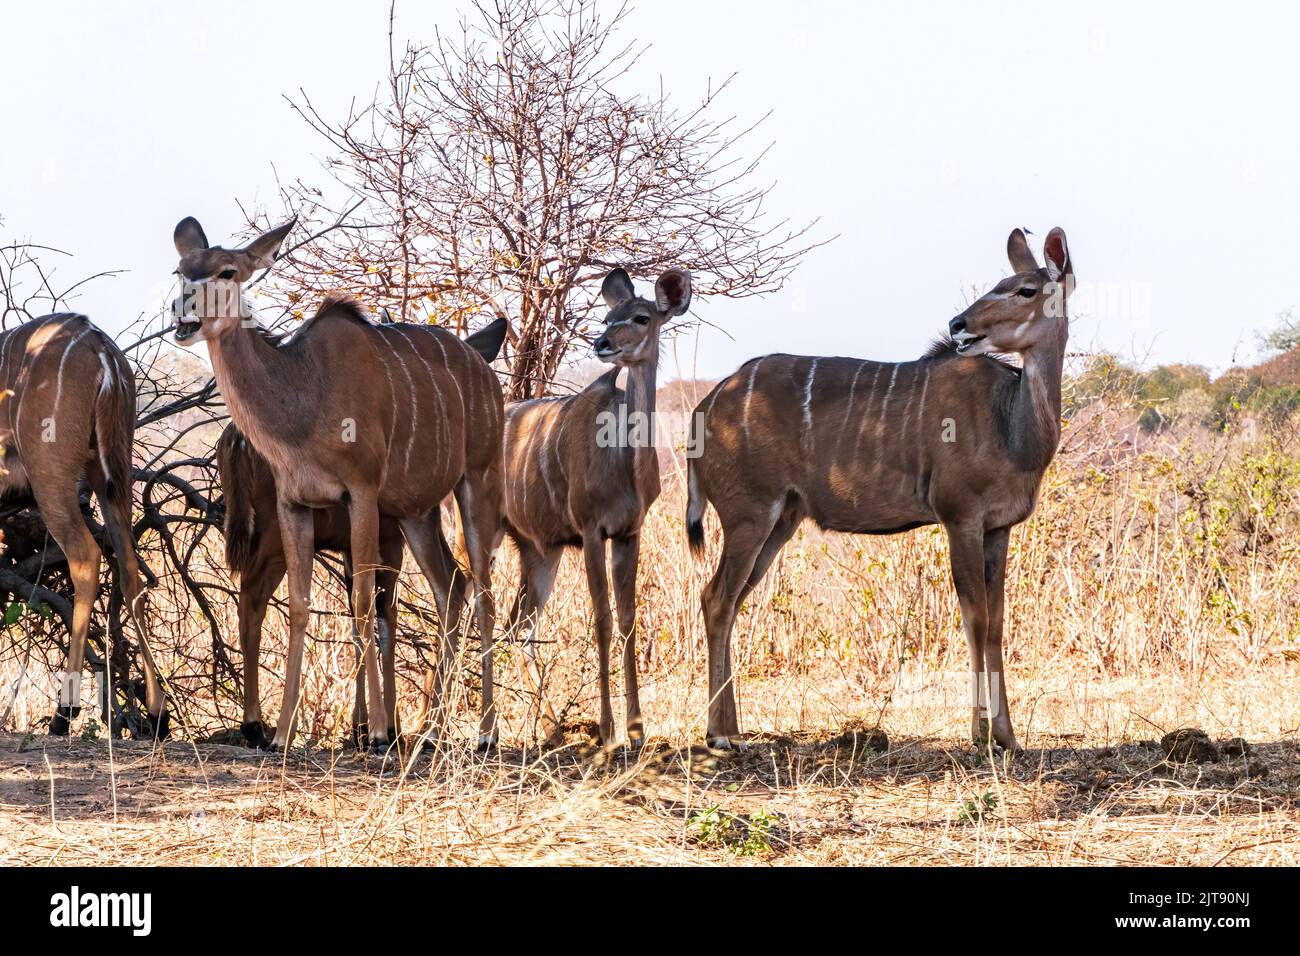 Greater kudu woodland antelopes standing under the tree. South Africa Stock Photo